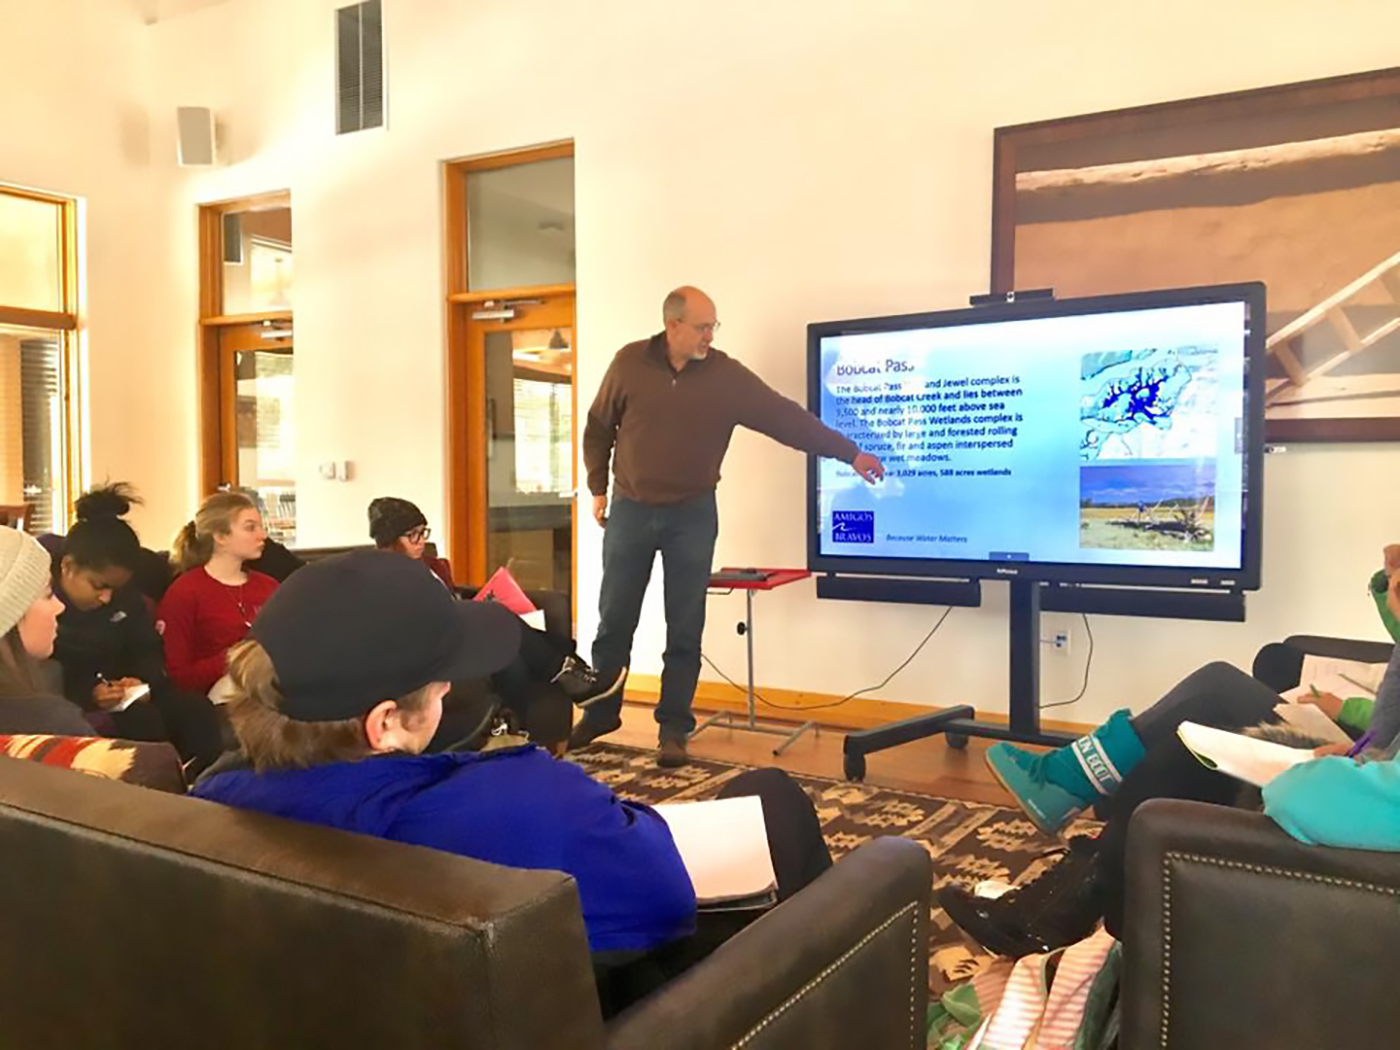 SMU-in-Taos faculty member teaches class inside a common area on campus